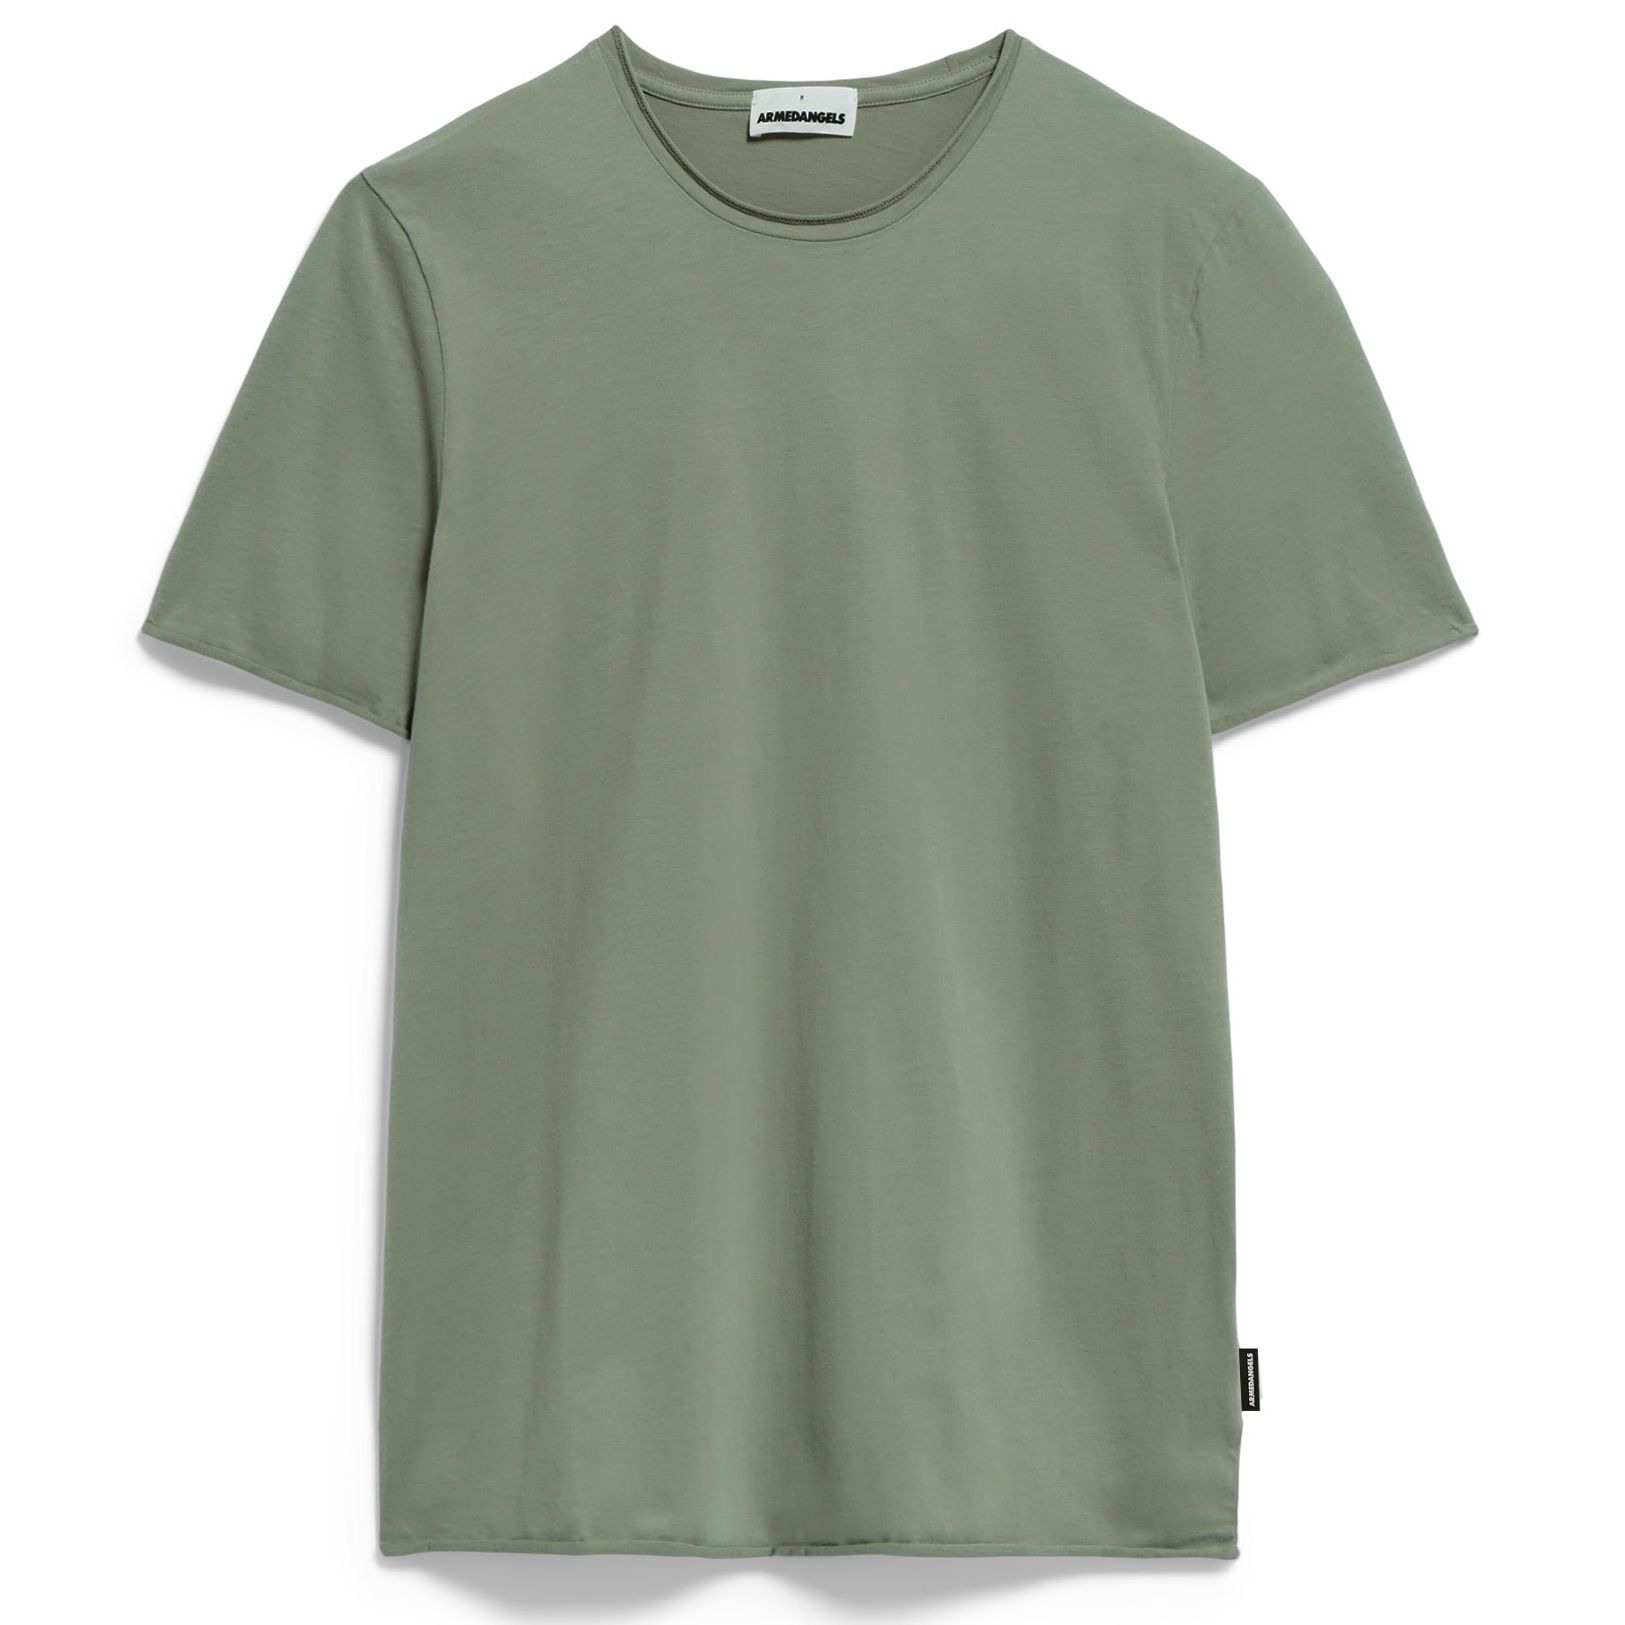 T-Shirt AAMON BRUSHED grey green